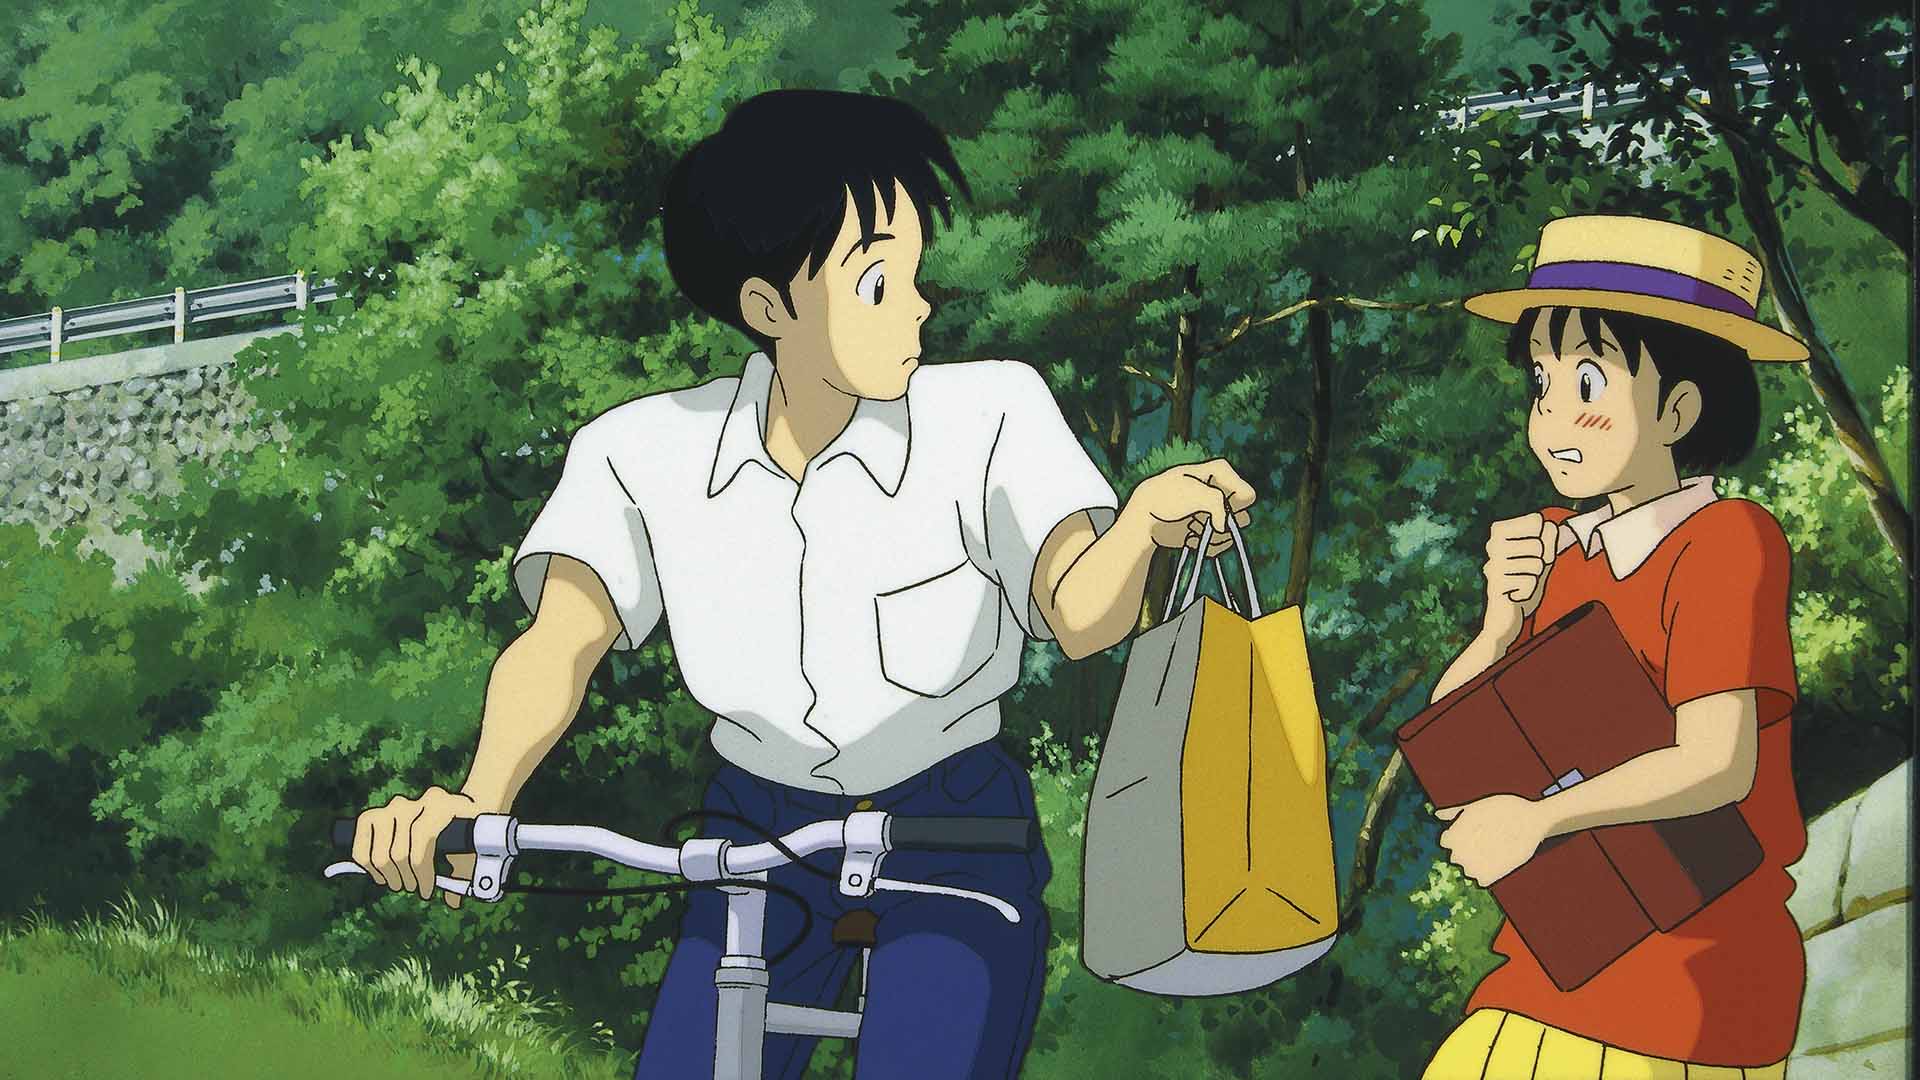 Studio Ghibli films are now streaming on HBO Max. Here's what to know. - Vox